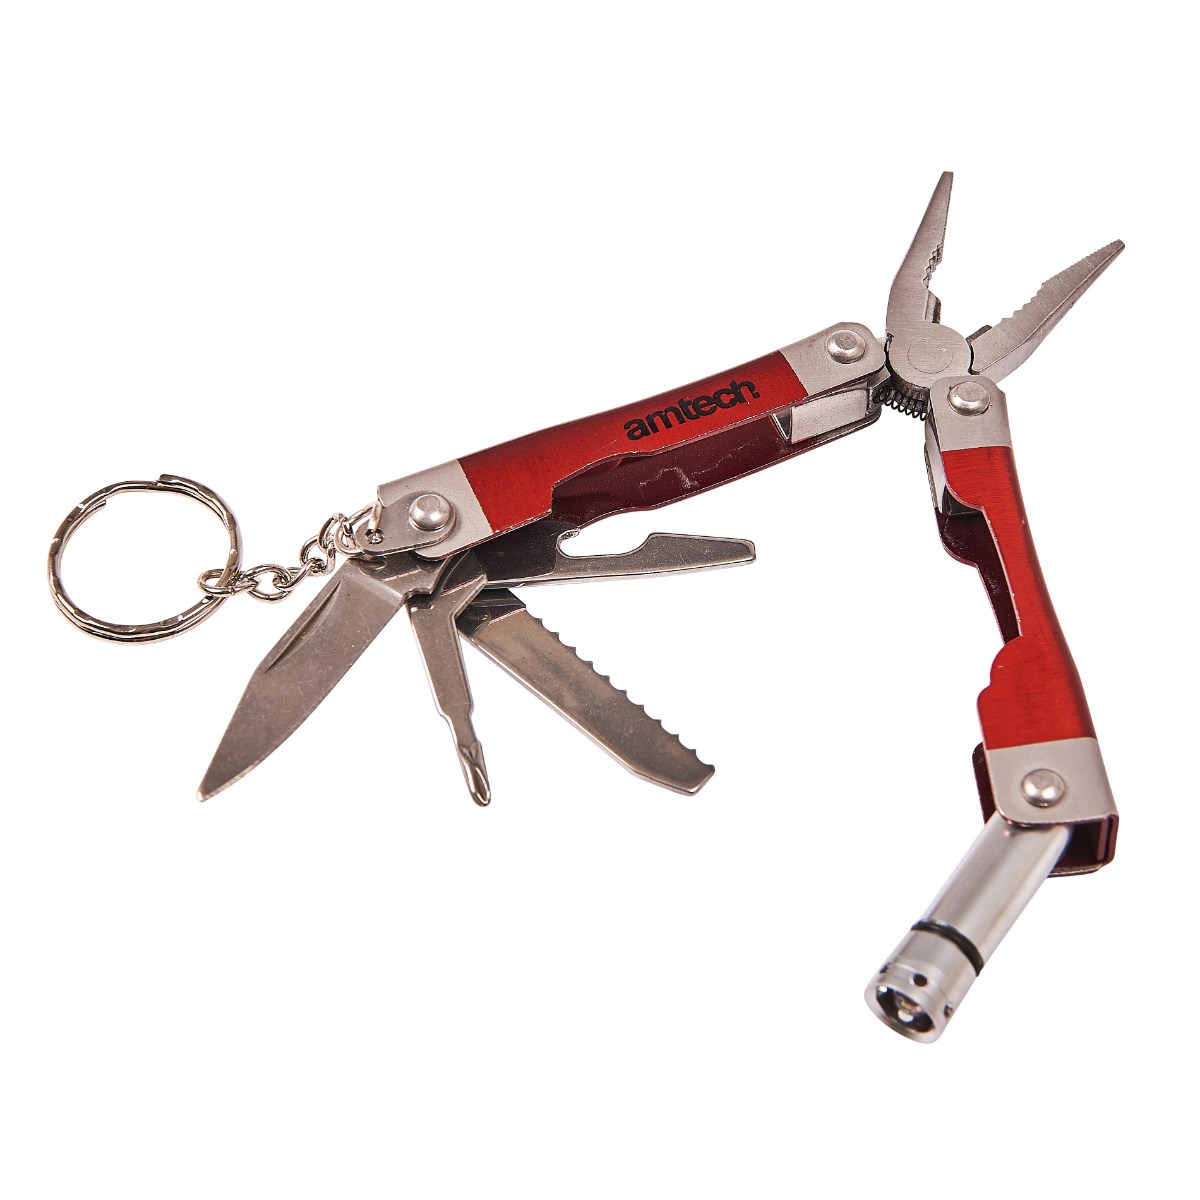 Amtech 8 in 1 micro plier with LED